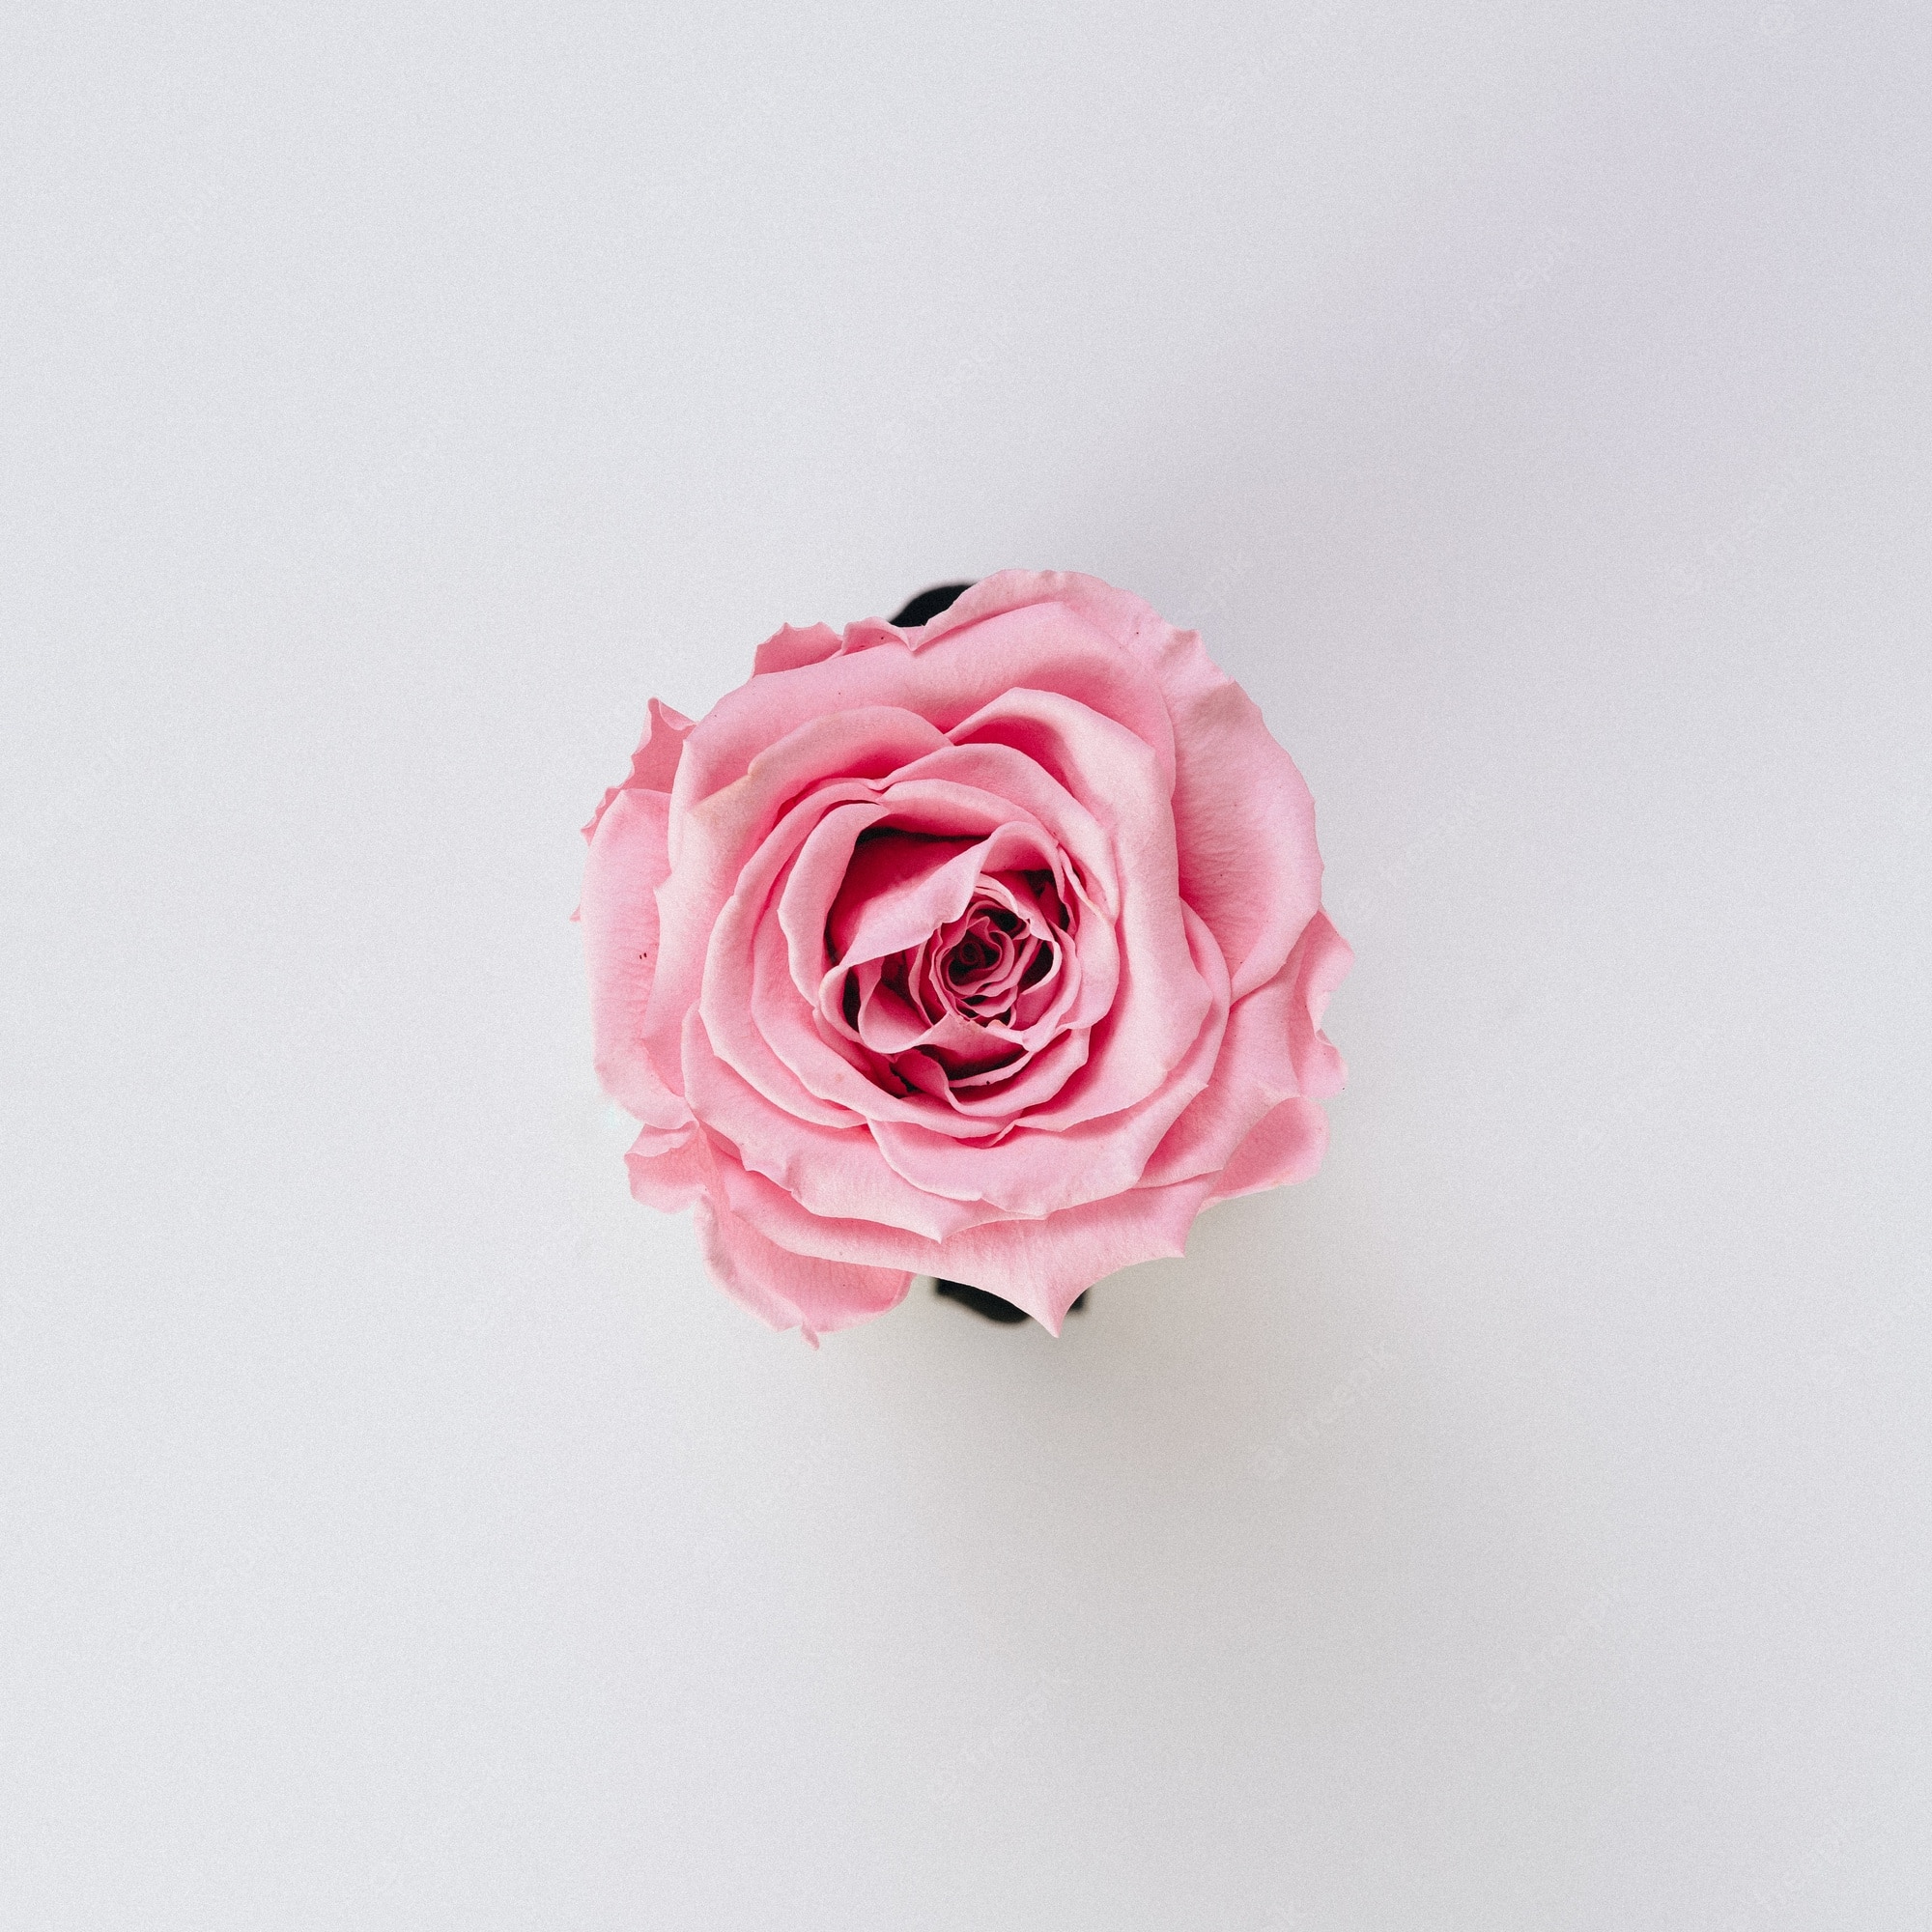 Pretty Roses Wallpapers